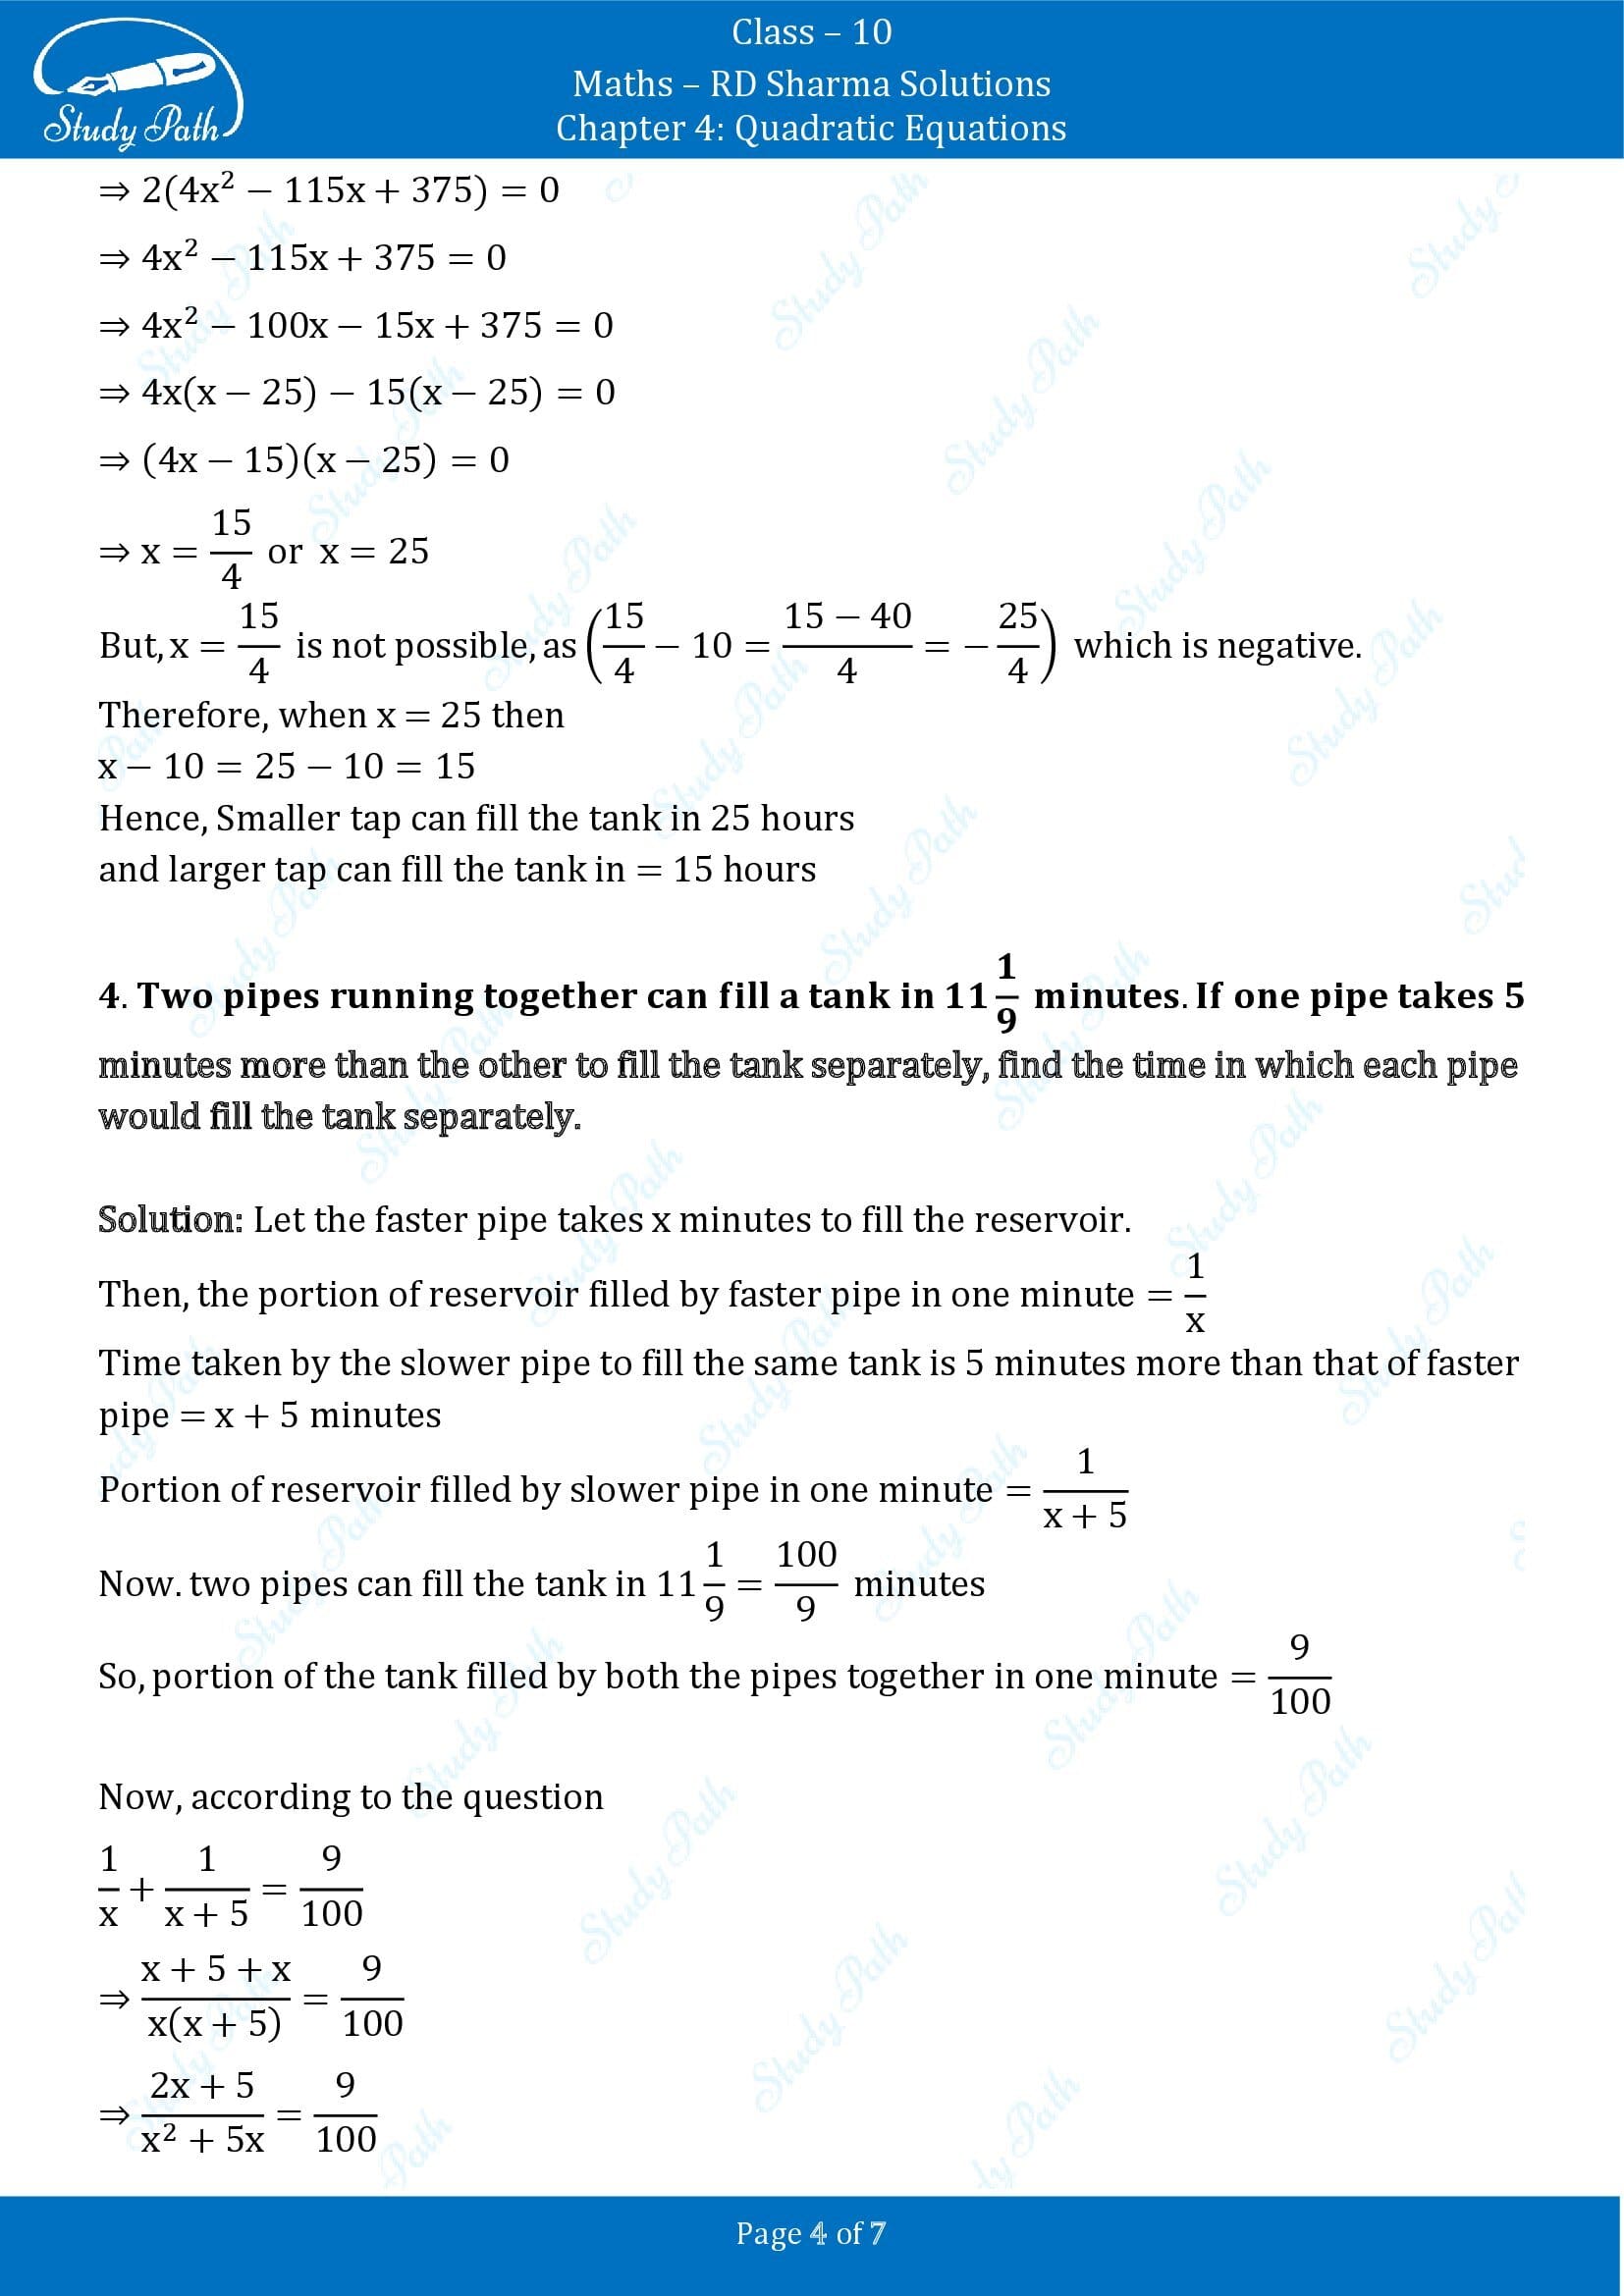 RD Sharma Solutions Class 10 Chapter 4 Quadratic Equations Exercise 4.12 00004